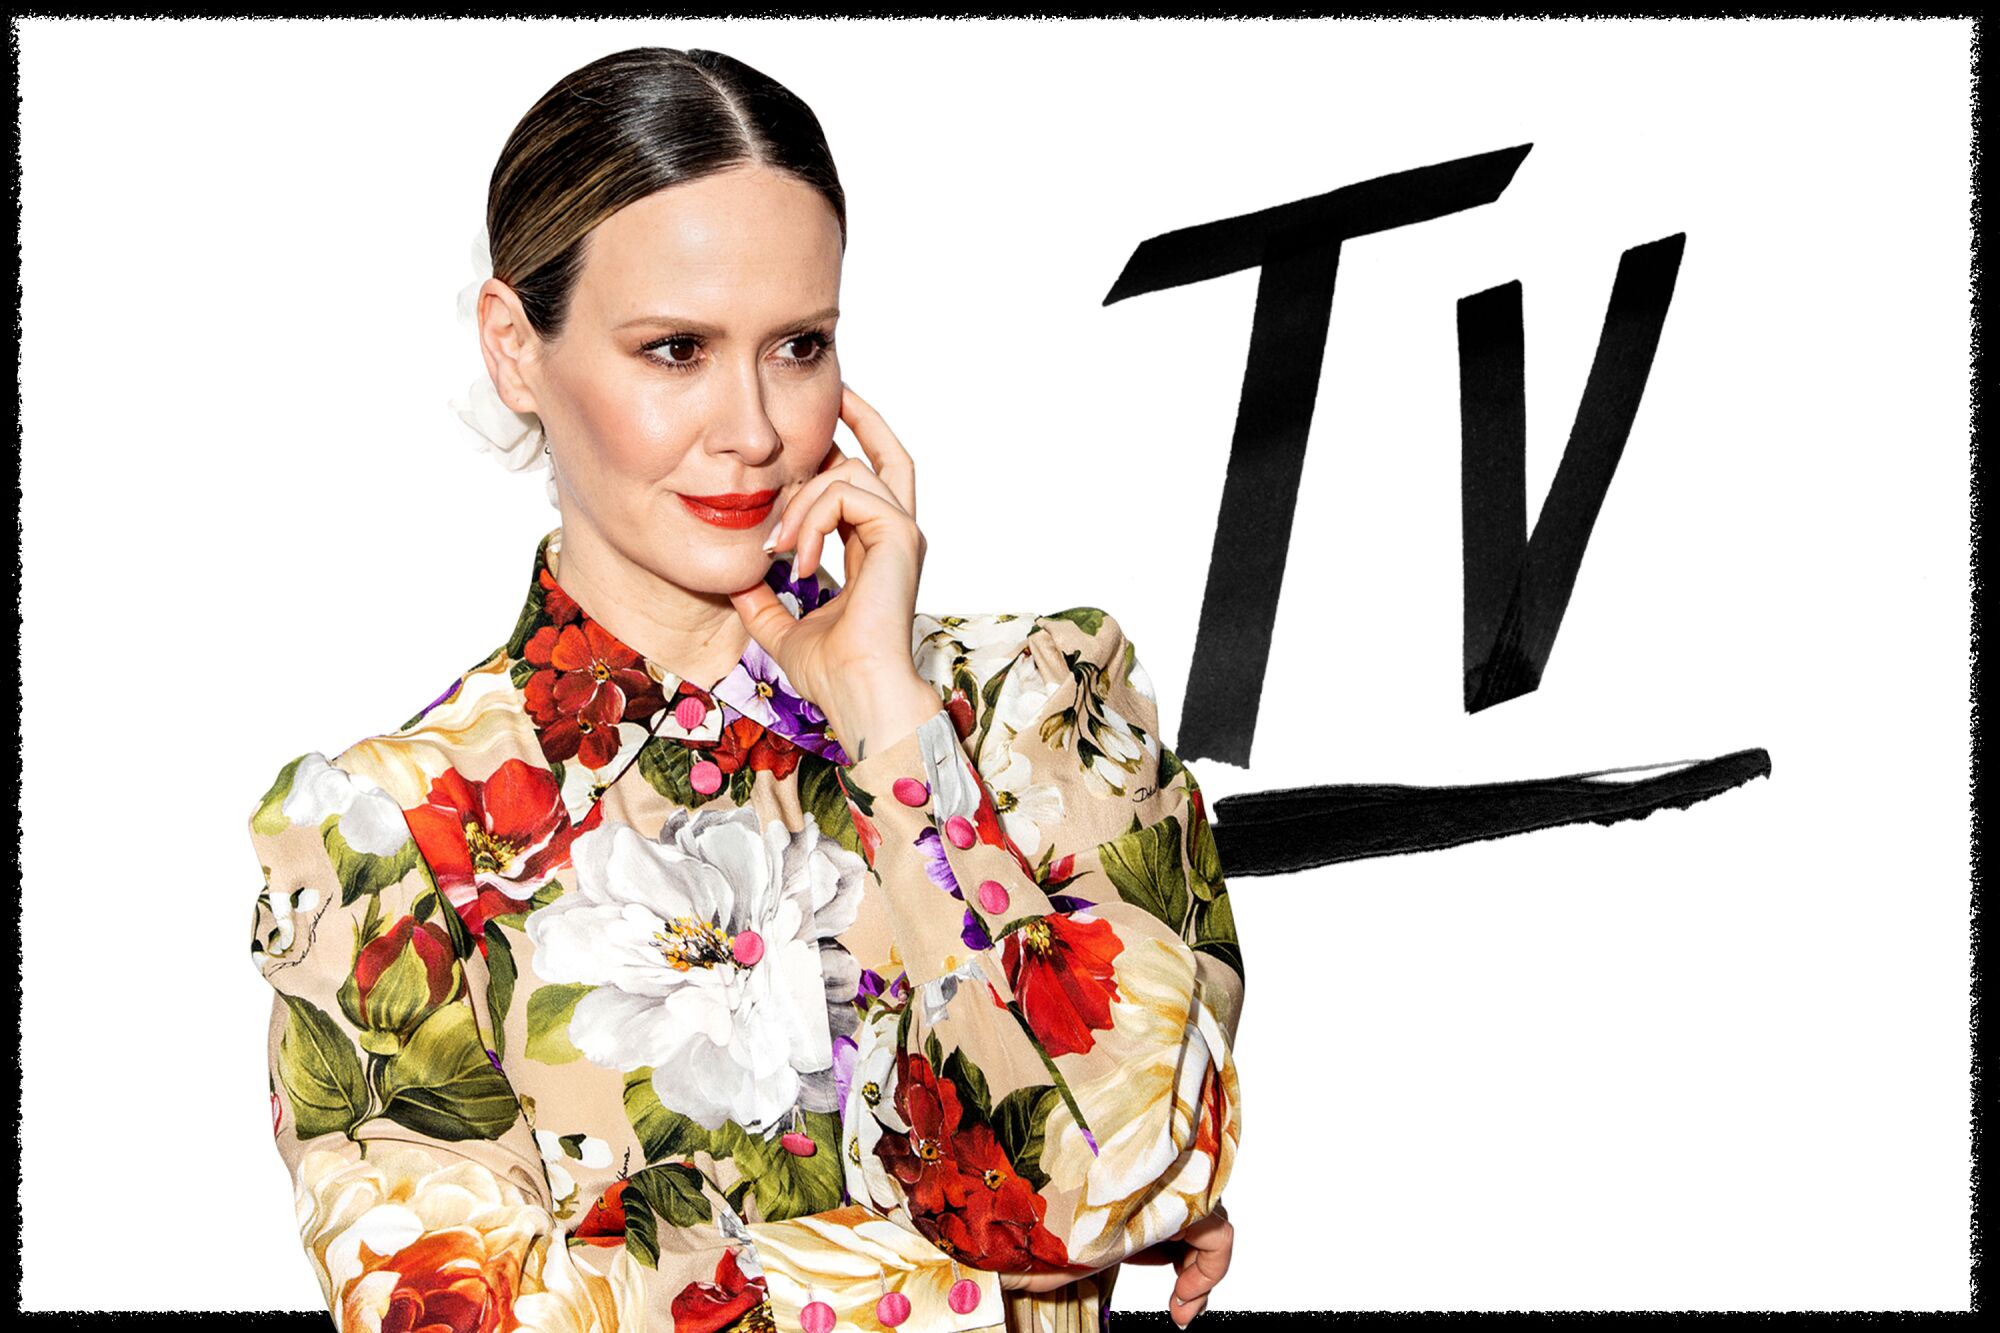 "Impeachment" star Sarah Paulson poses in a floral dress